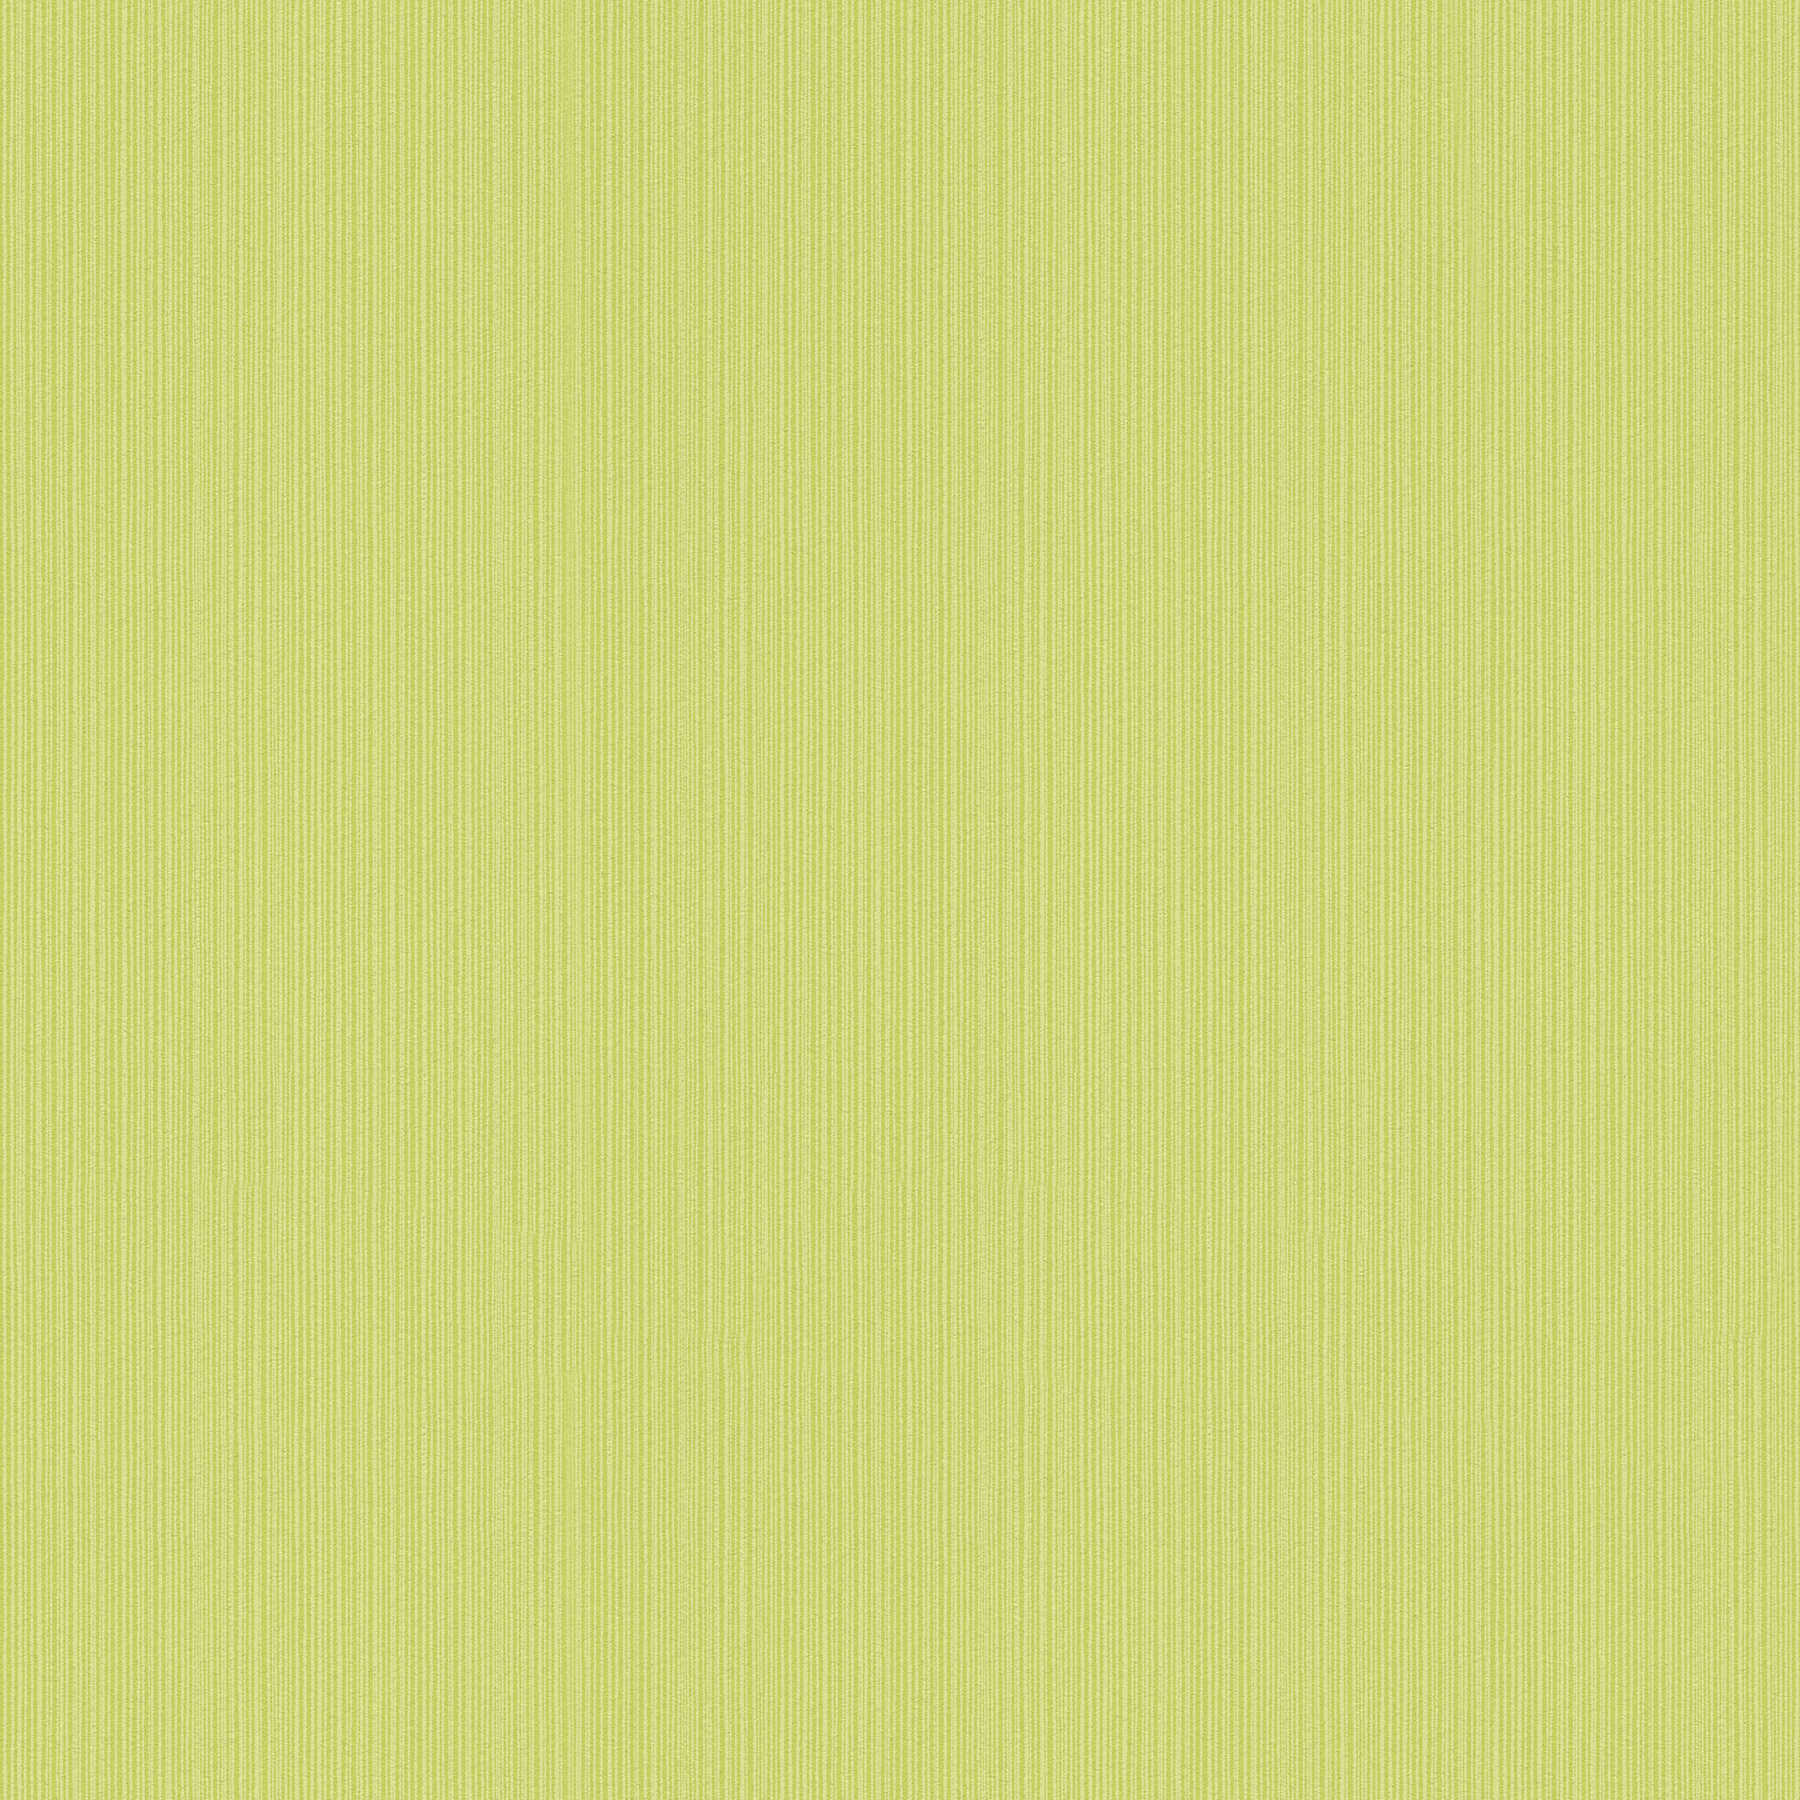 wallpaper lime green plain, with striped texture effect
